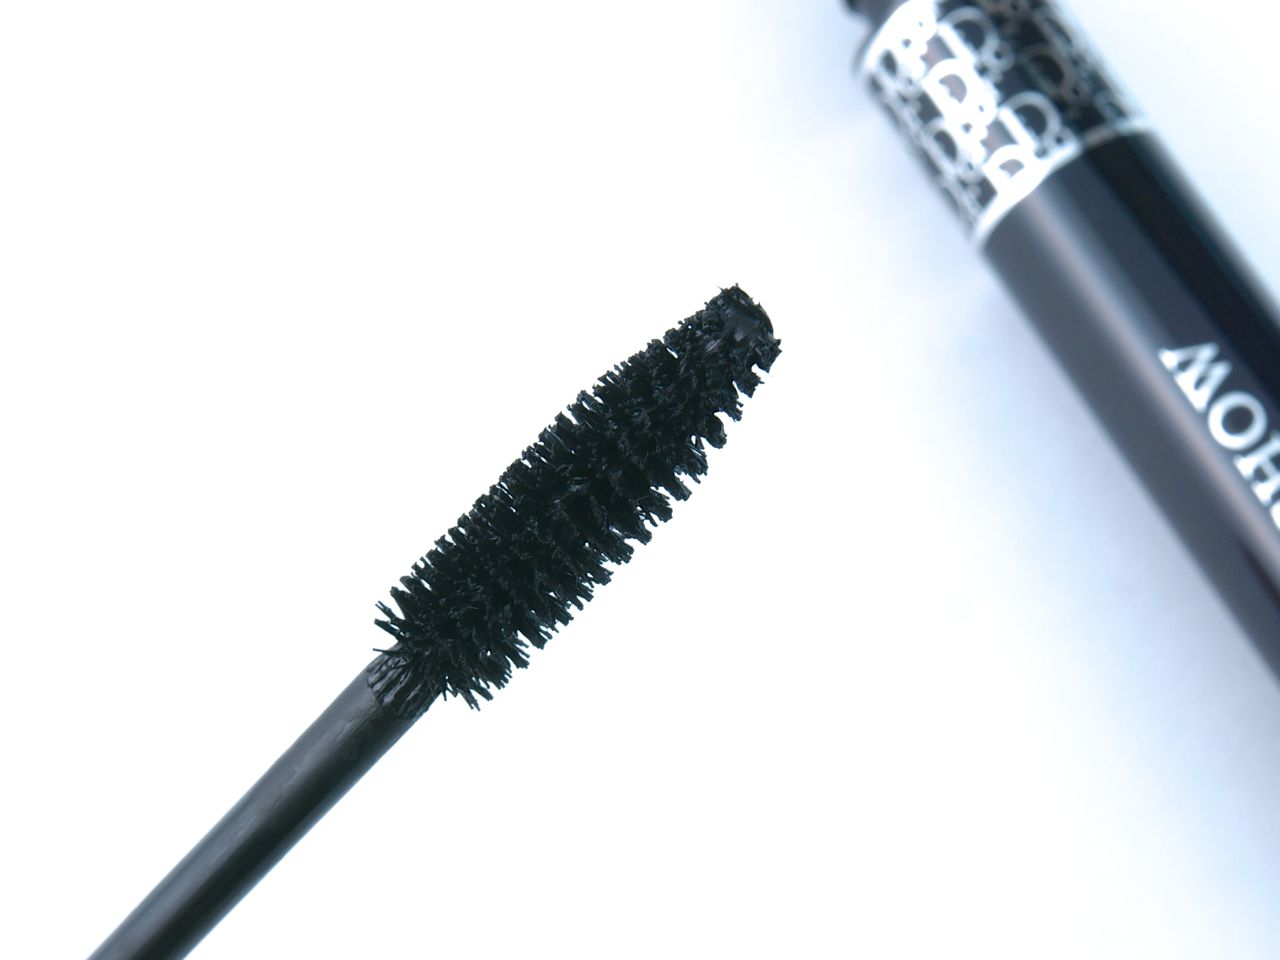 New 2015 Dior Diorshow Mascara with Lash Extension Effect in "090 Pro Black": Review and Swatches